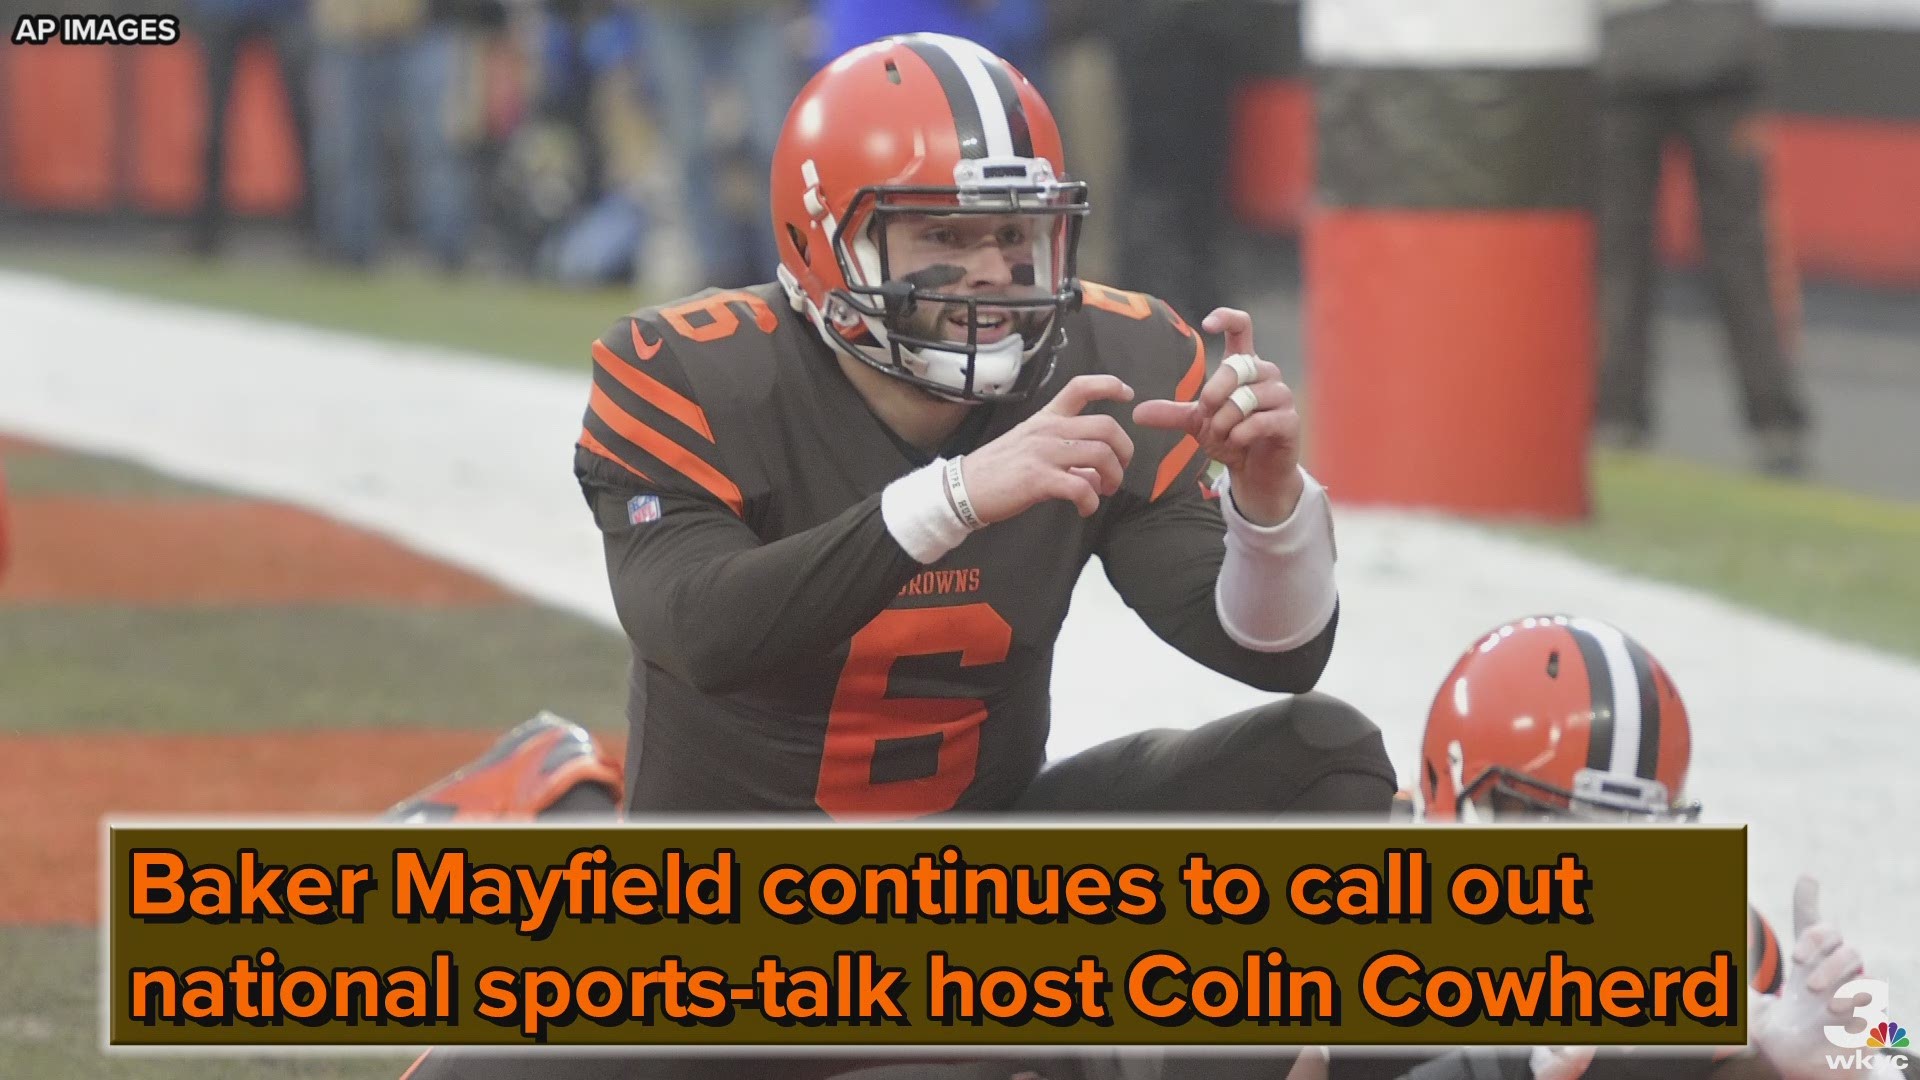 Quarterback Baker Mayfield continues to call out national sports-talk host Colin Cowherd for his opinions about the Cleveland Browns.